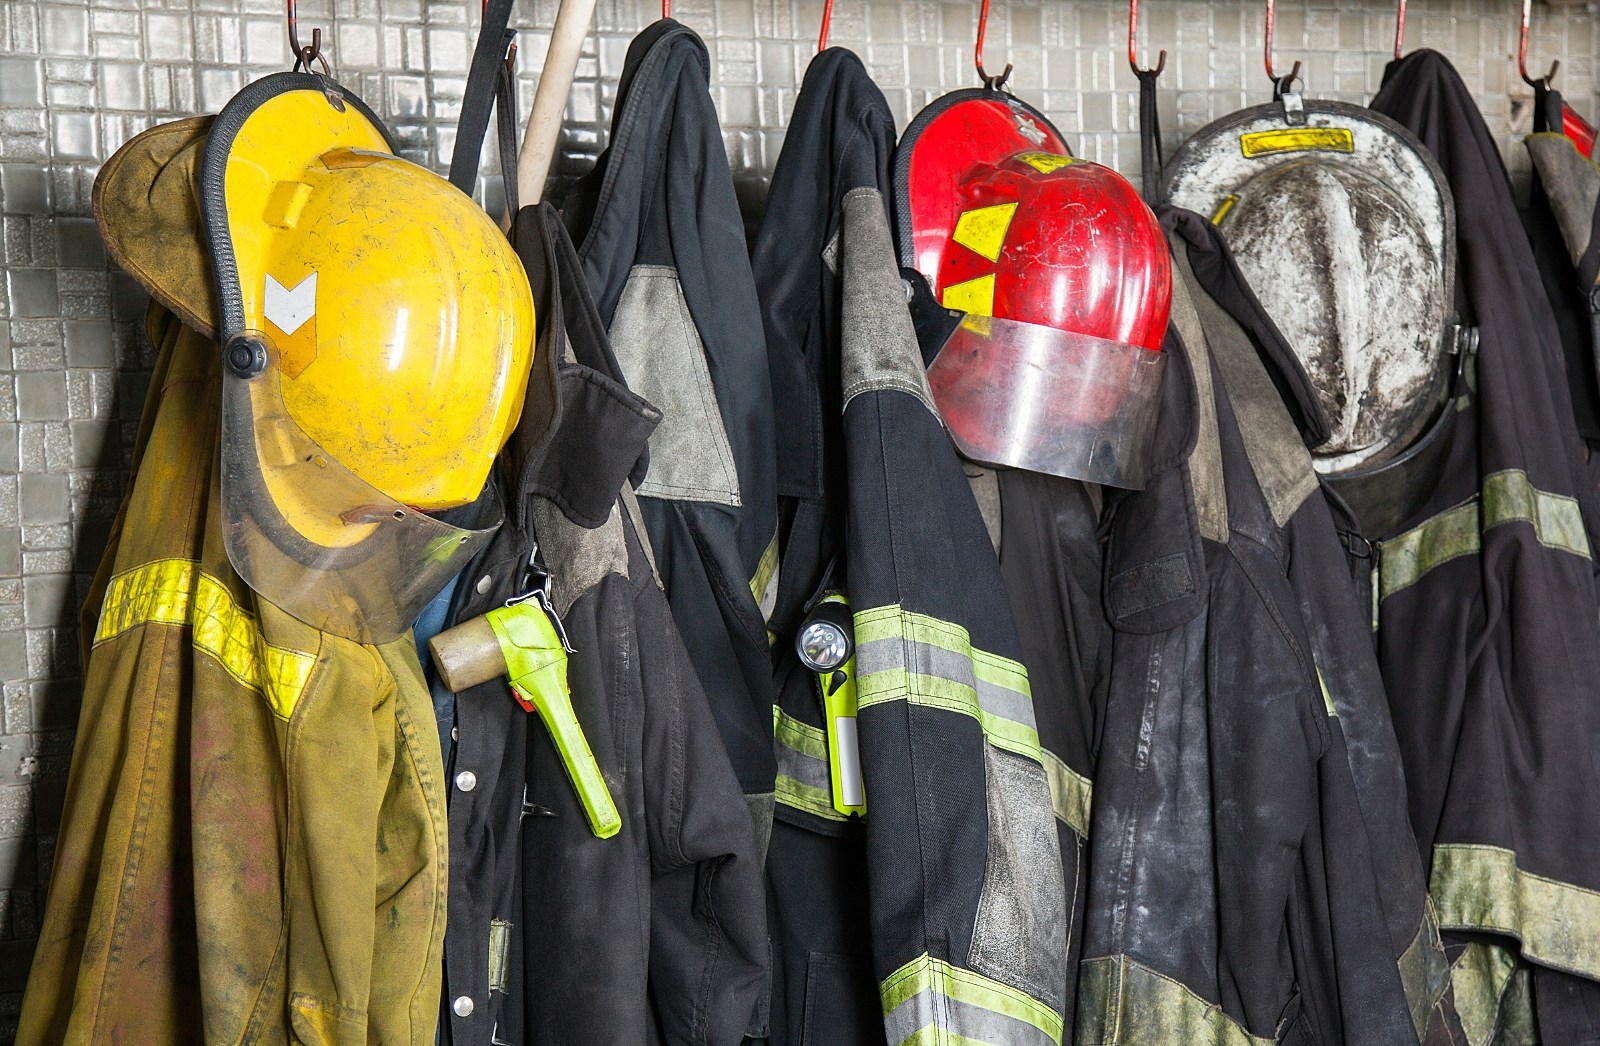 Firefighters fear the toxic chemicals in their gear could be
contributing to cancer cases